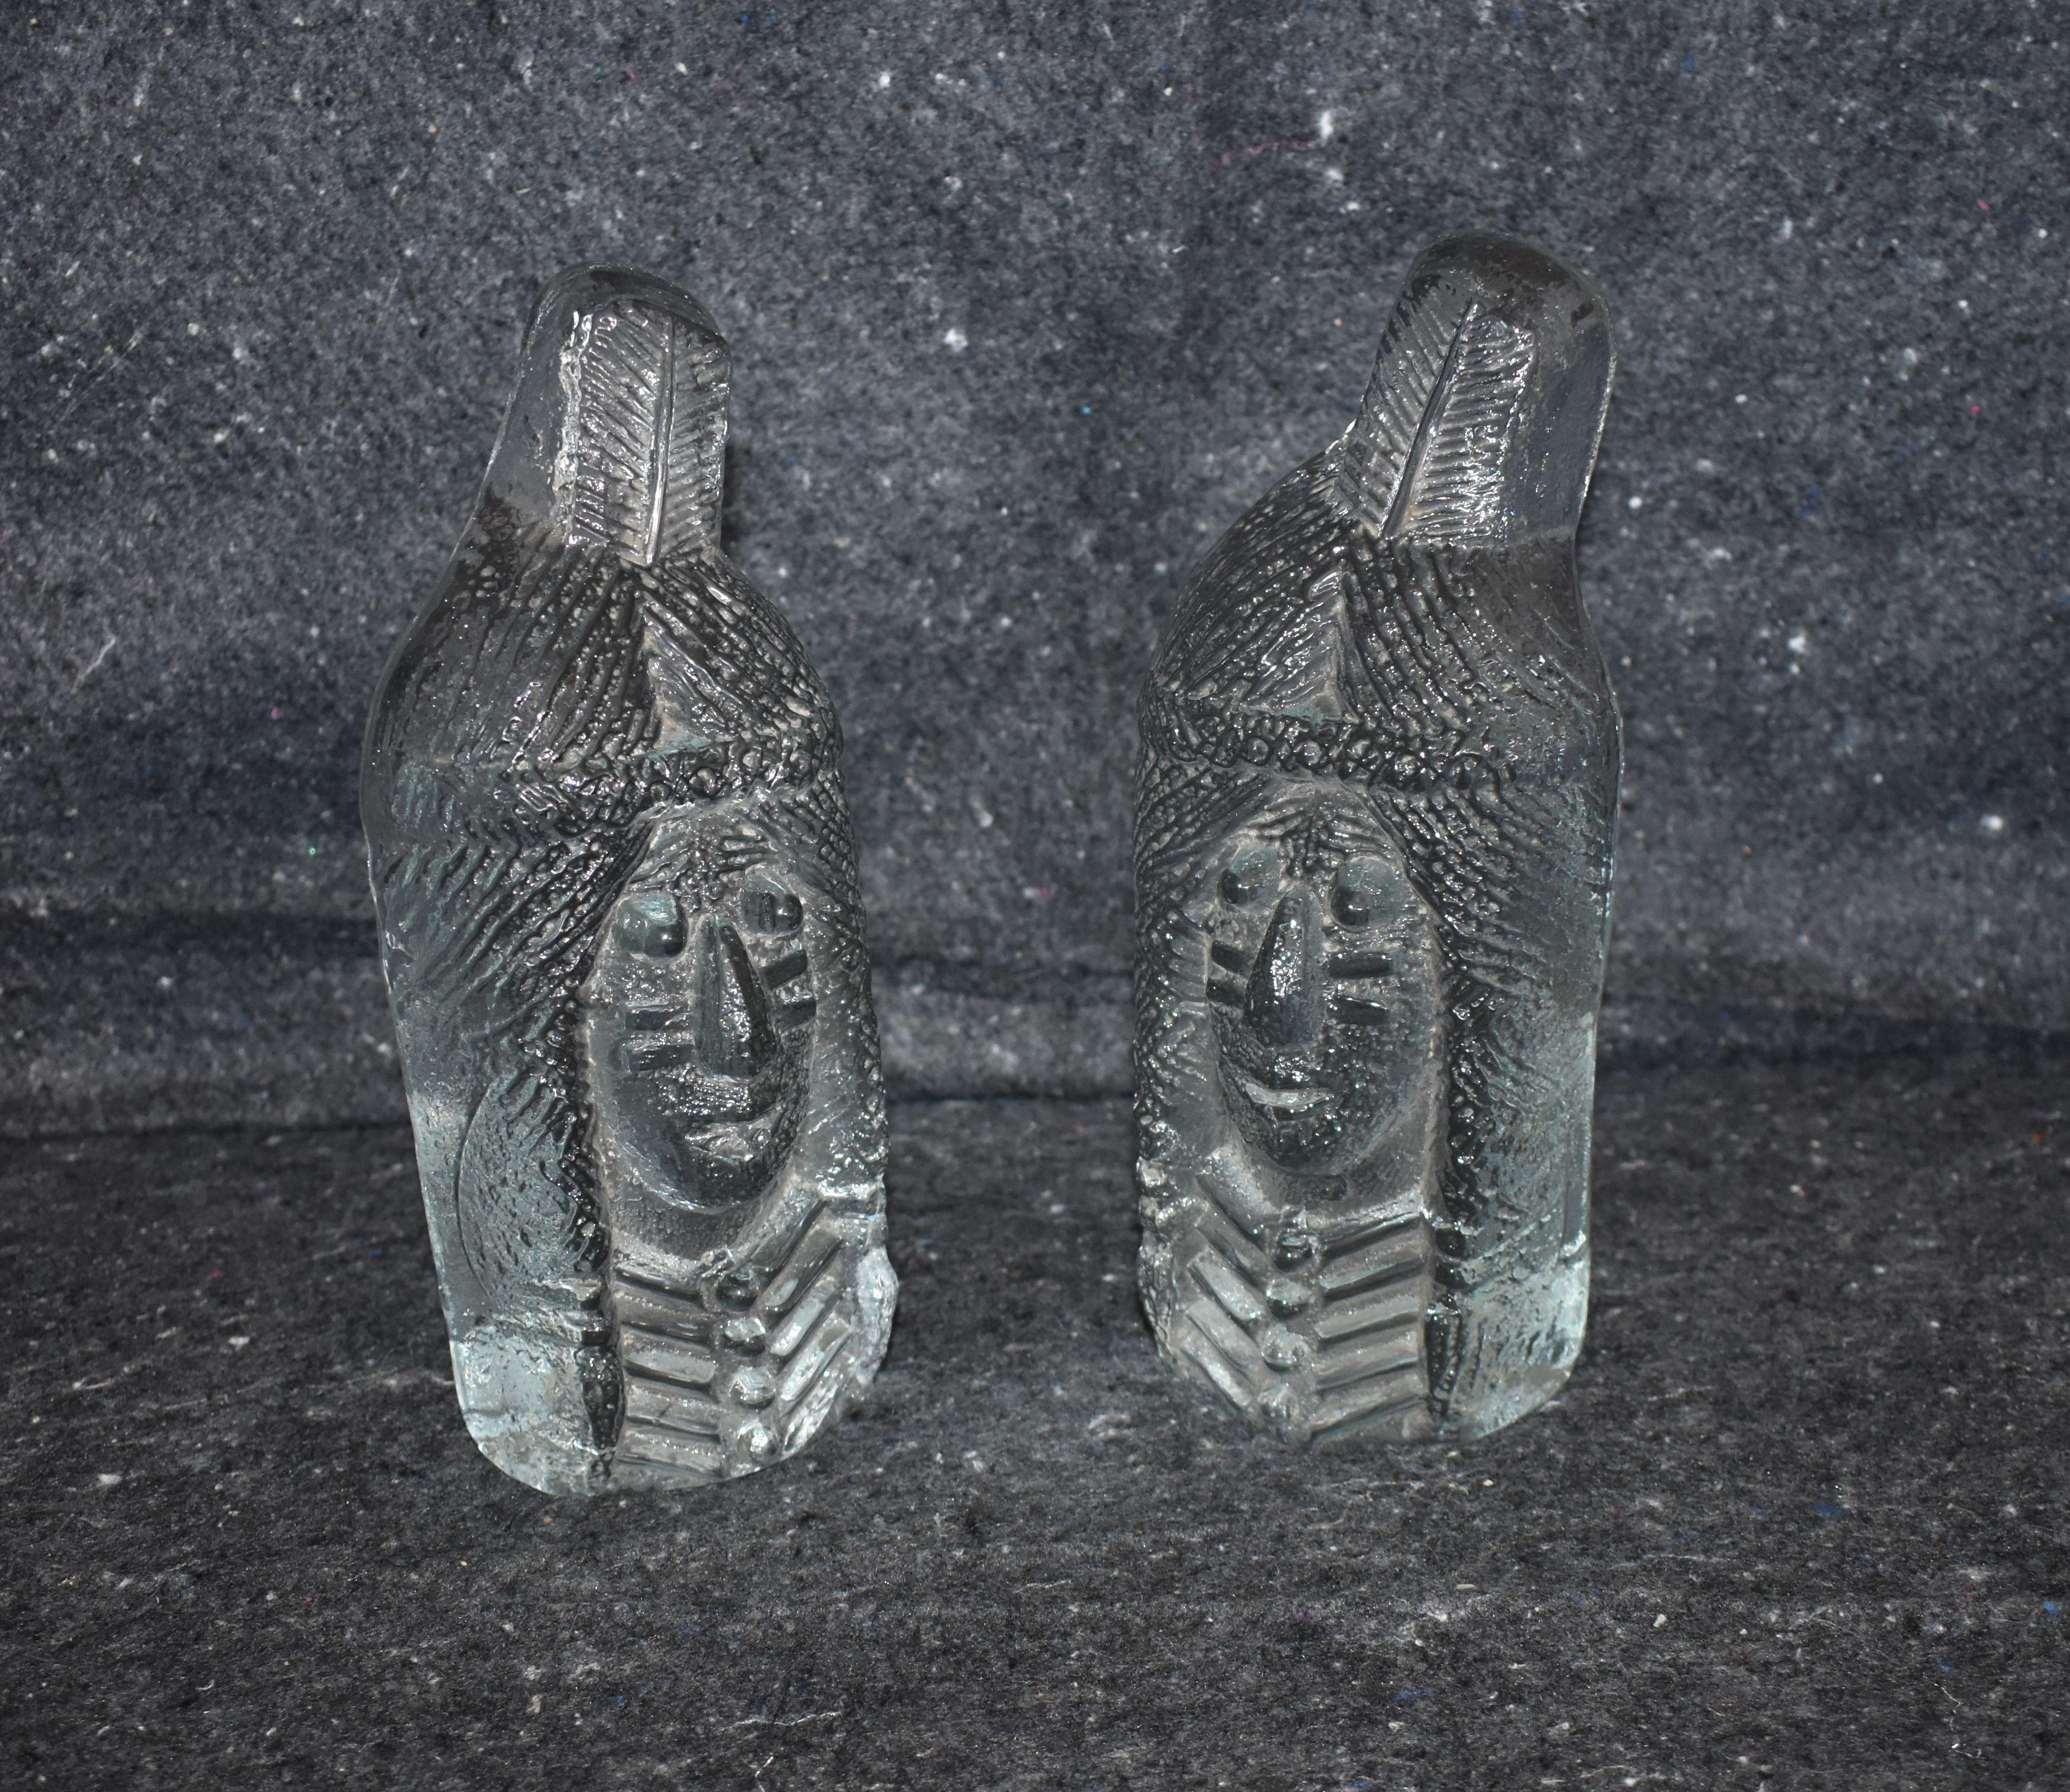 Blenko 1970s clay-molded textured clear glass bookends.